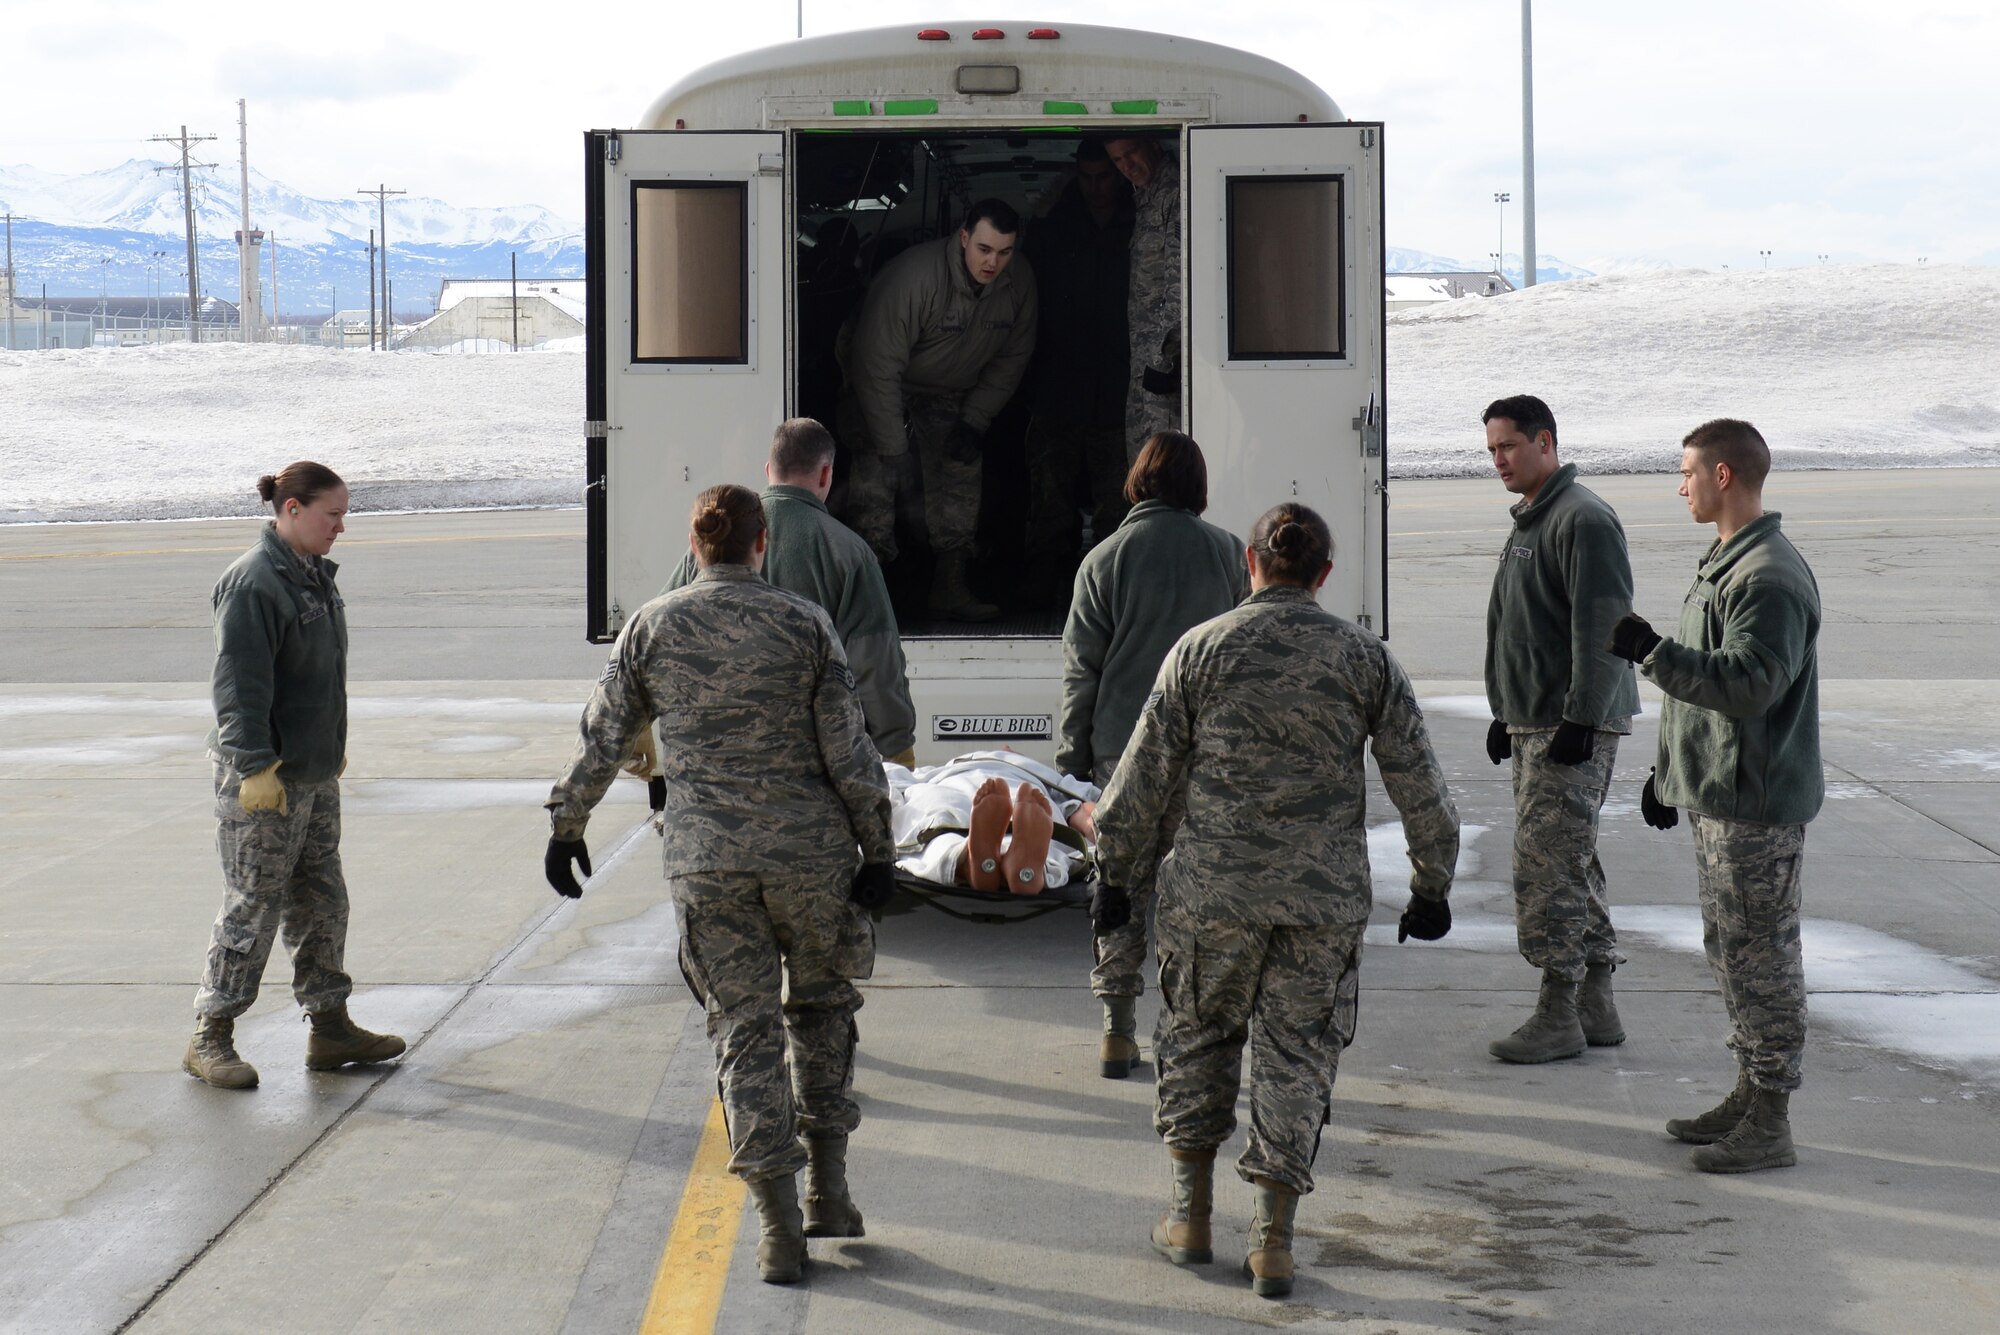 673d Medical Group Airmen transport a simulated patient from a C-17 Globemaster III into a bus during the EnRoute Patient Staging System exercise at Joint Base Elmendorf-Richardson, Alaska, April 3, 2017. The ERPSS provides patient reception and limited emergent intervention, and ensures patients are medically and administratively prepared for flight in a safe and timely aeromedical evacuation. 